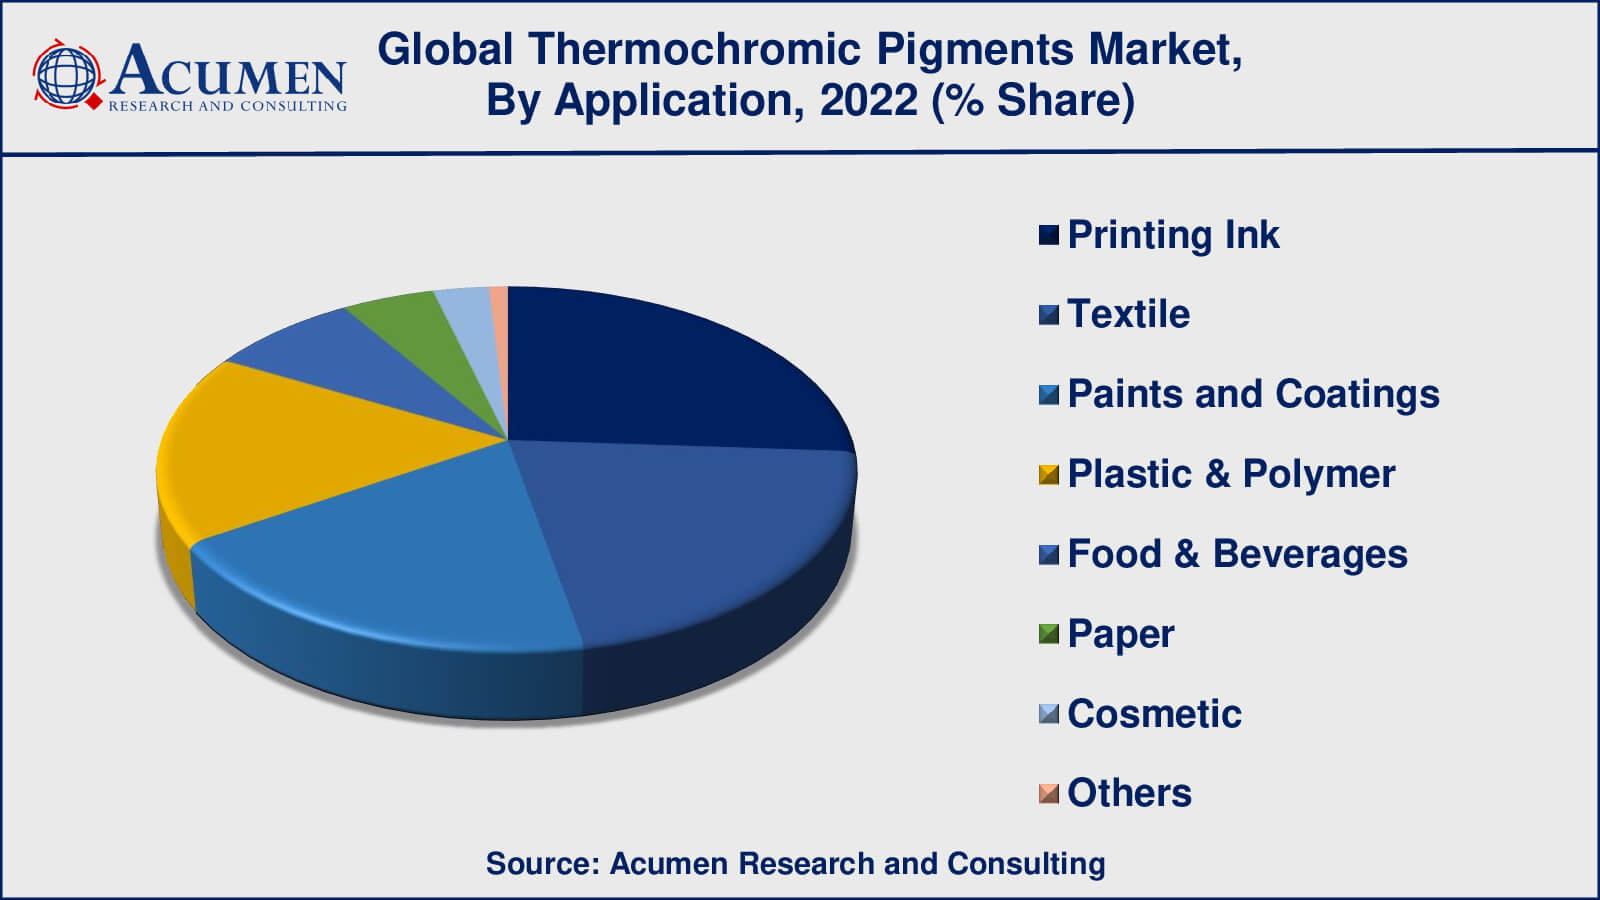 Thermochromic Pigments Market Drivers